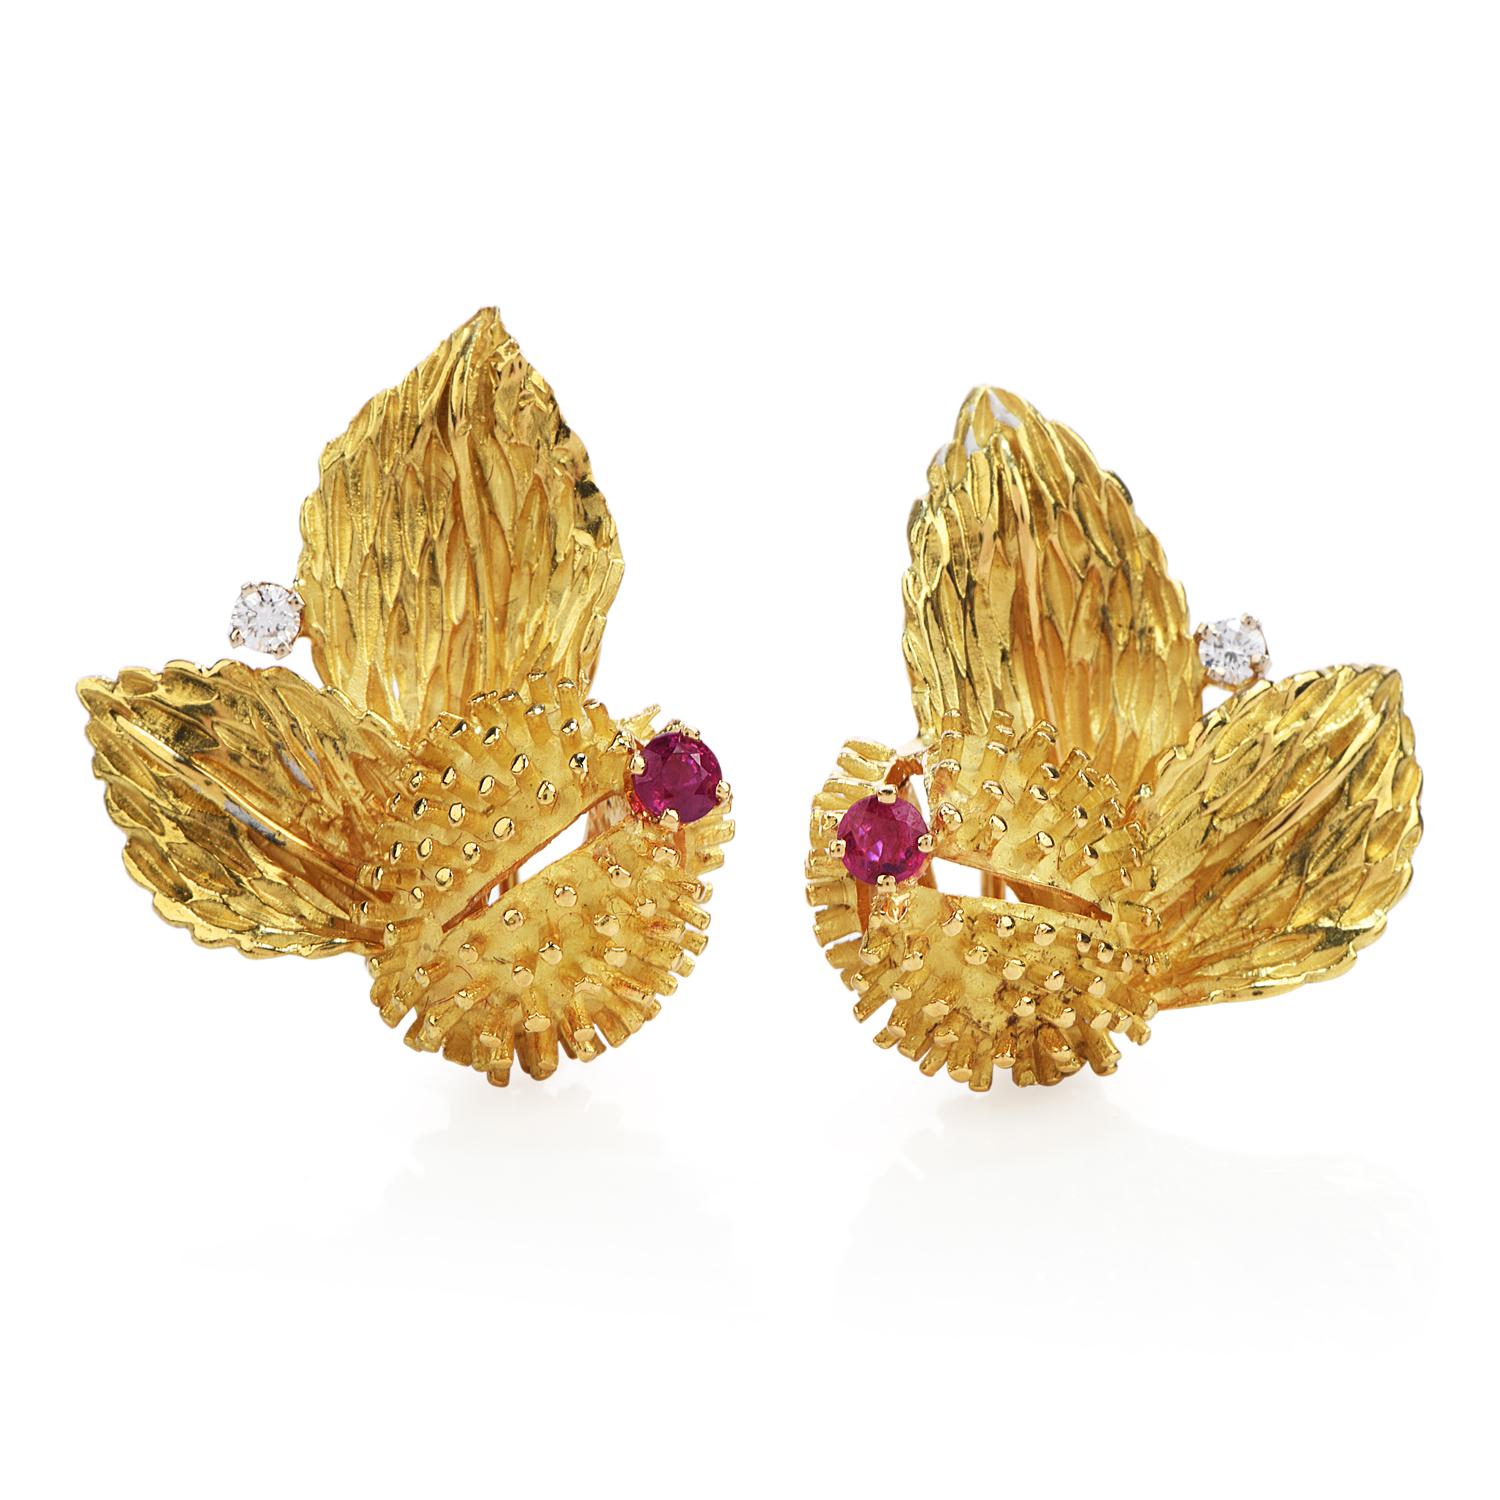 Lovely Earrings, with excellent Finish and one of a Kind style from Tiffany & Co!

Crafted in Solid 18K Yellow Gold,

Live these spiky bold Flower Tiffany gold Earrings, with two Round Cut Diamonds with a total carat weight of 0.10 cts, VS Clarity